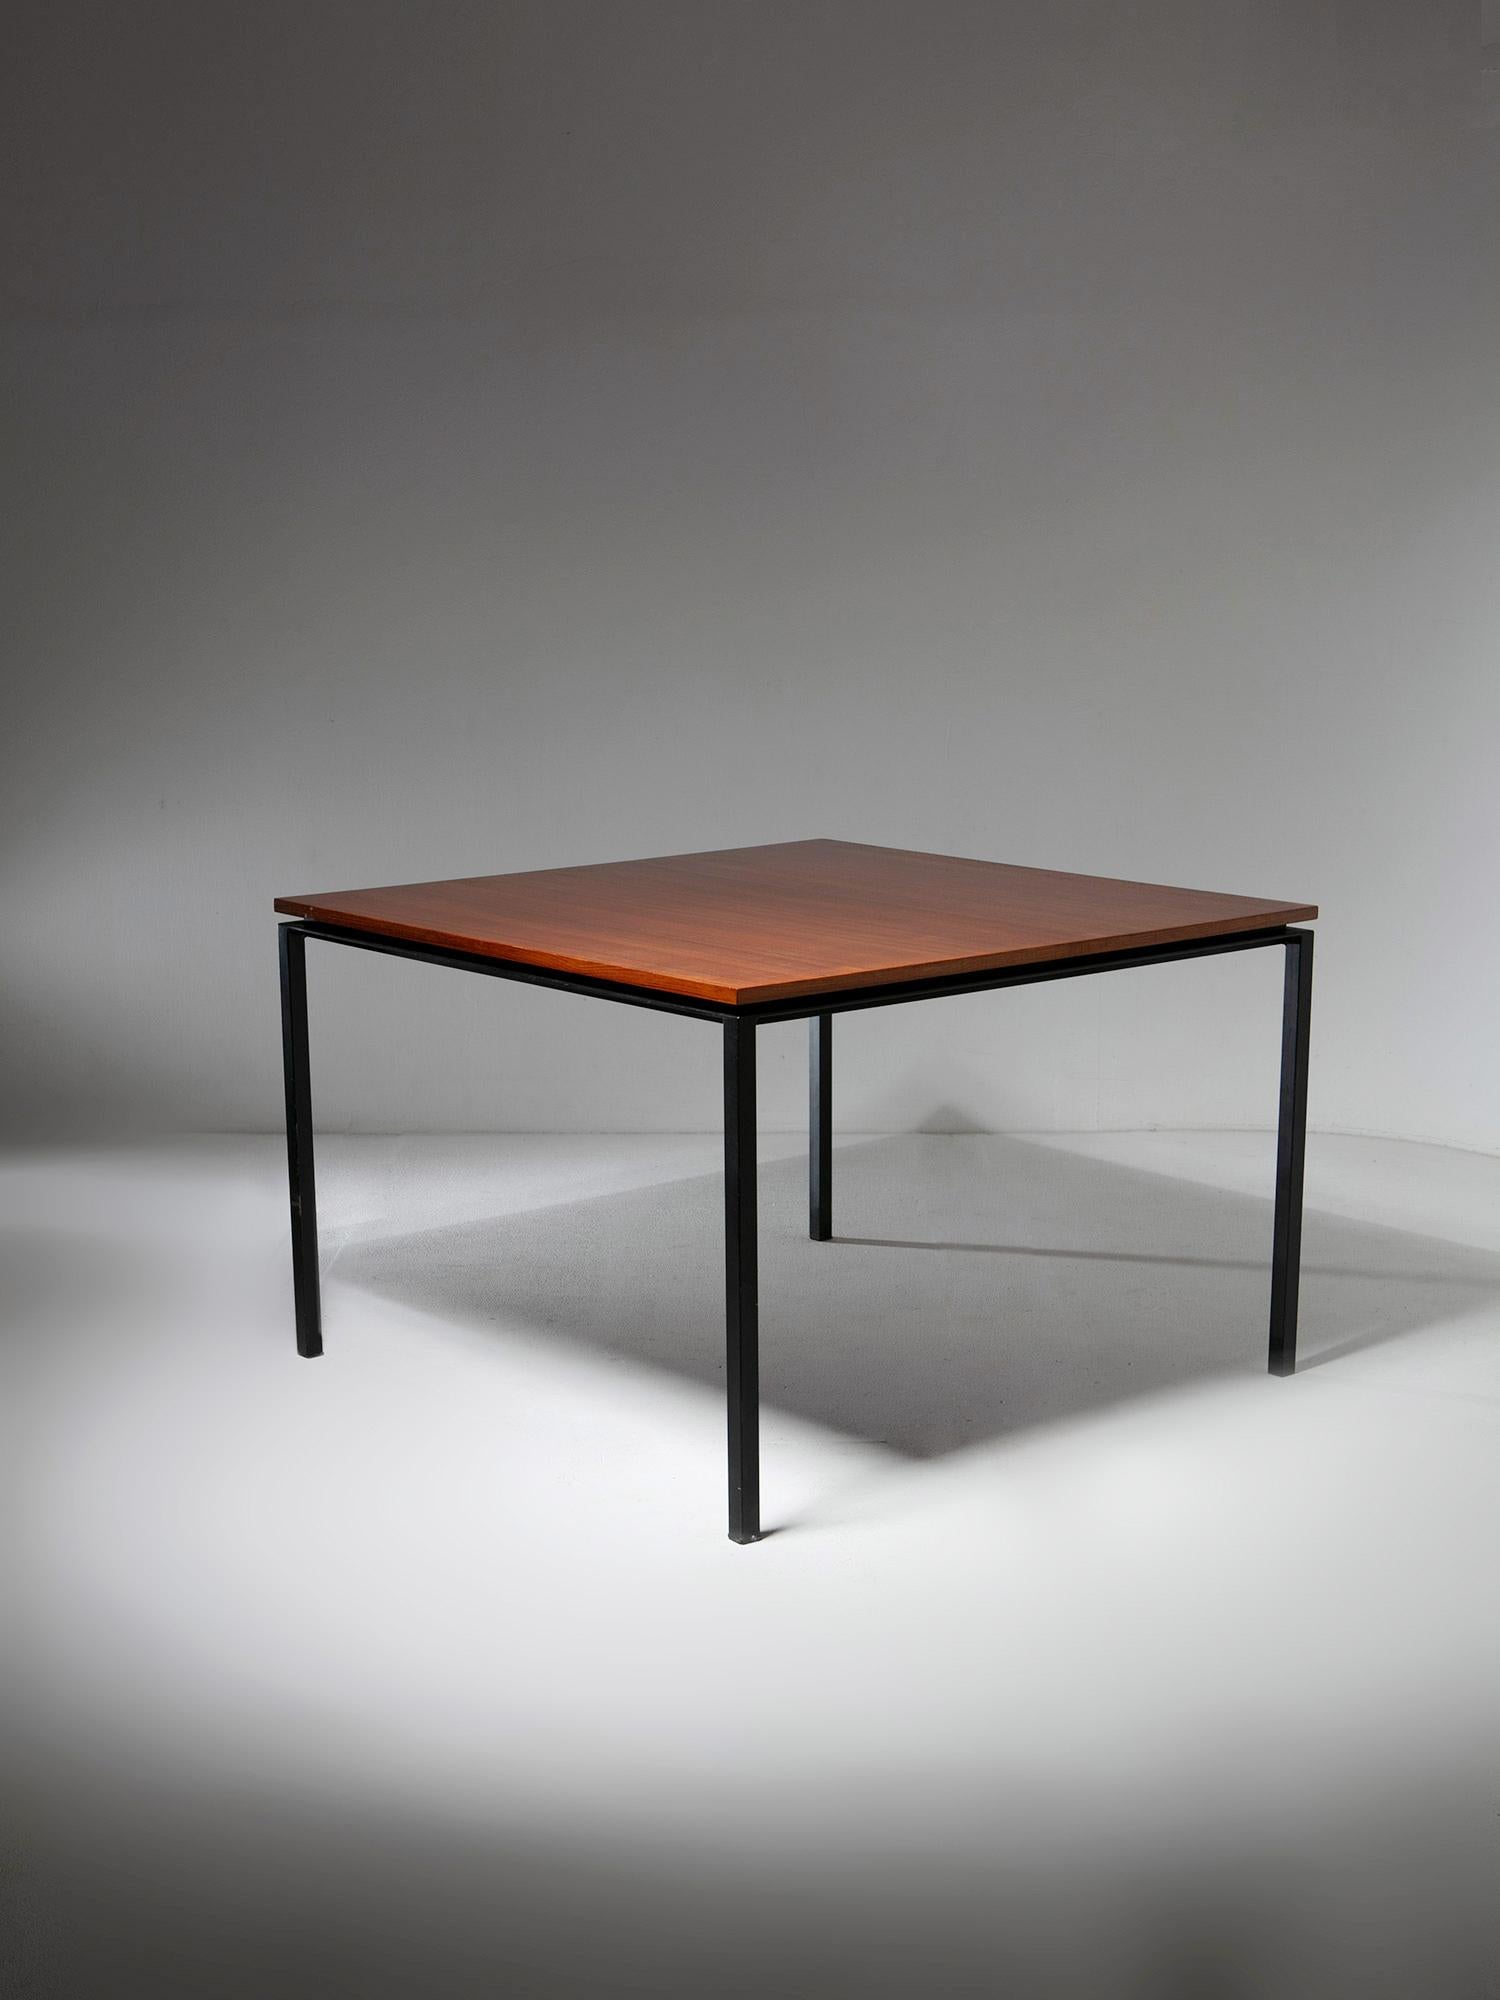 Squared dining table by Paolo Tiche for Arform.
Black metal sturdy frame supports a thin teak wood top.
